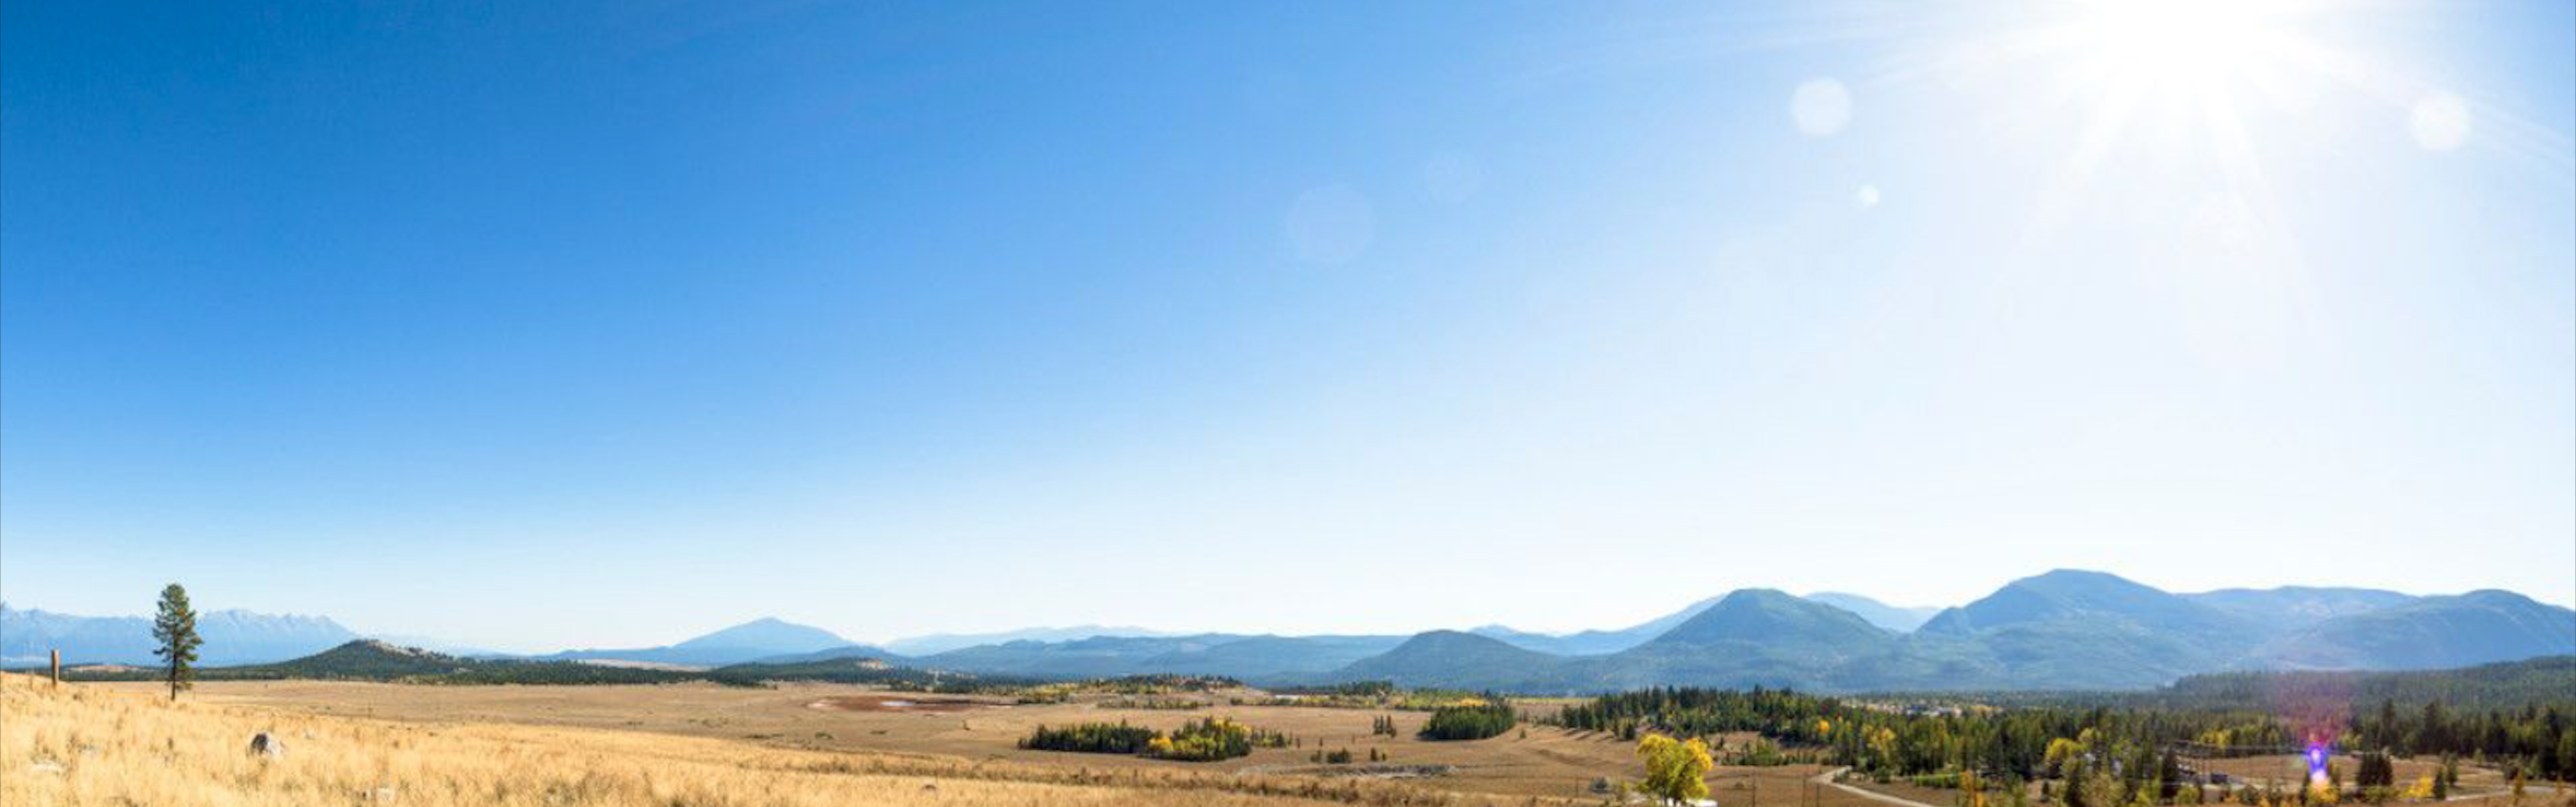 Early fall plains and grassland scenery under bright blue sky and sun, trees and mountains in distance